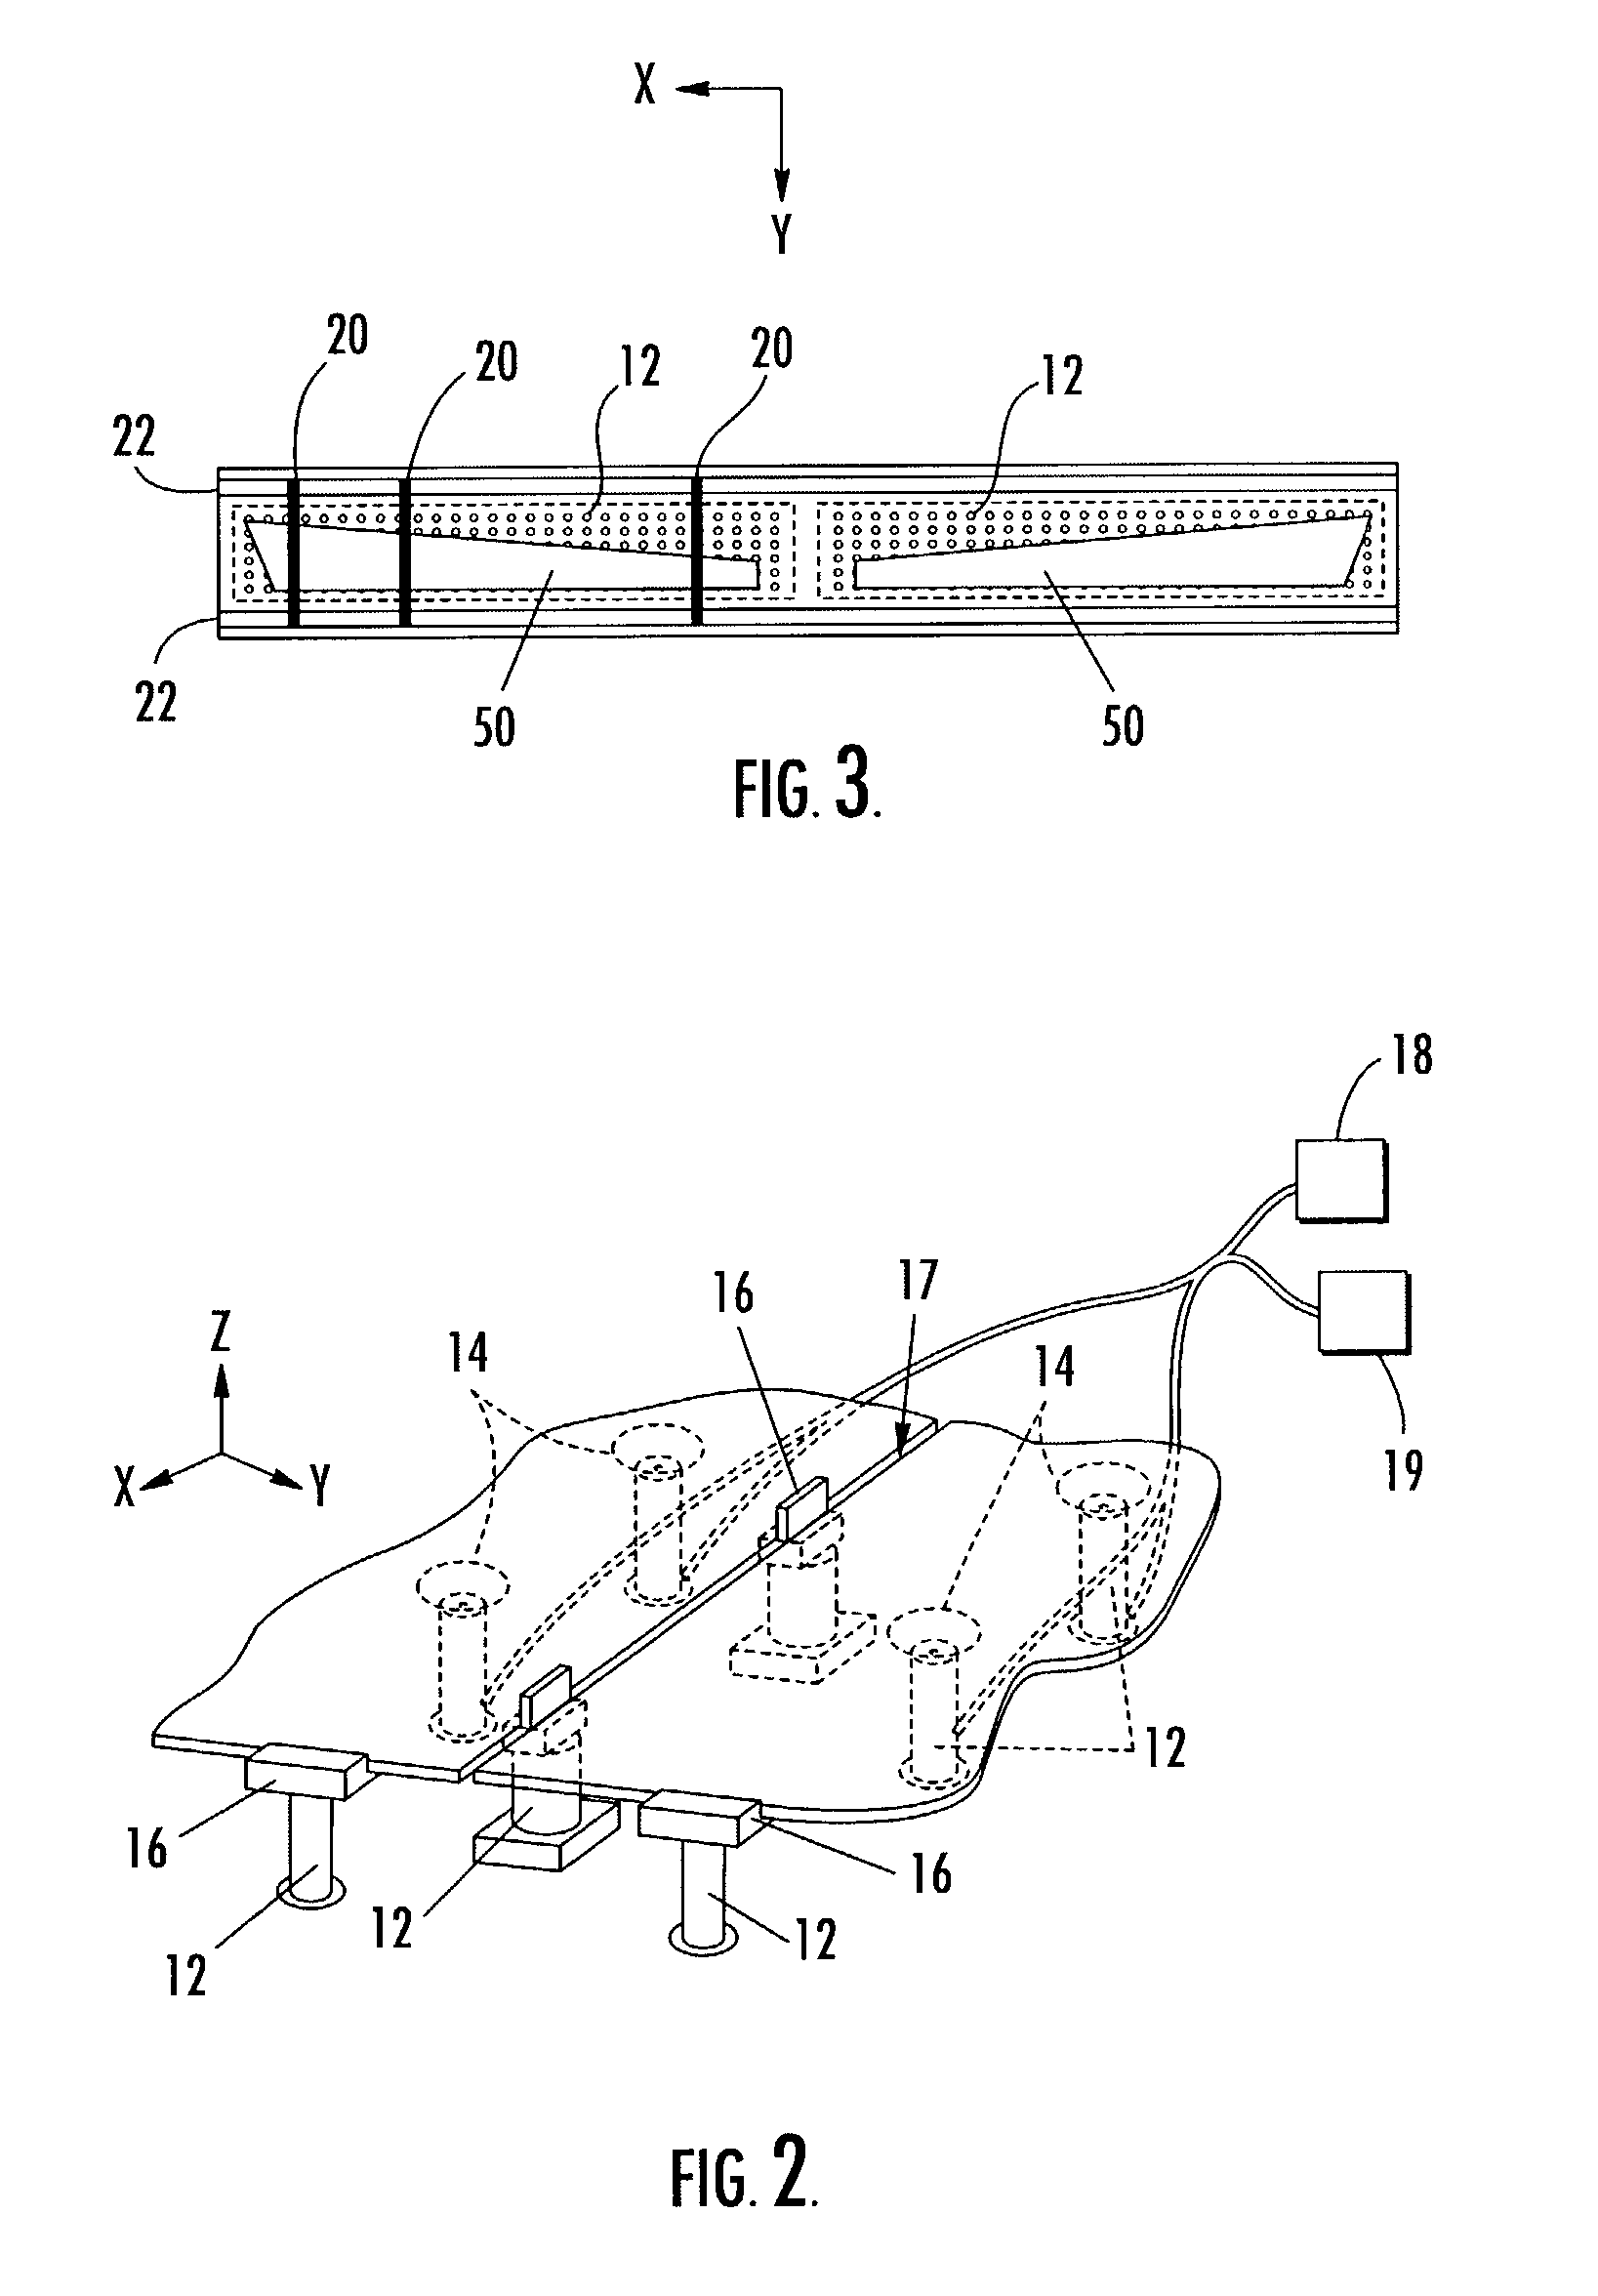 Adjustable system and method for supporting and joining structural members